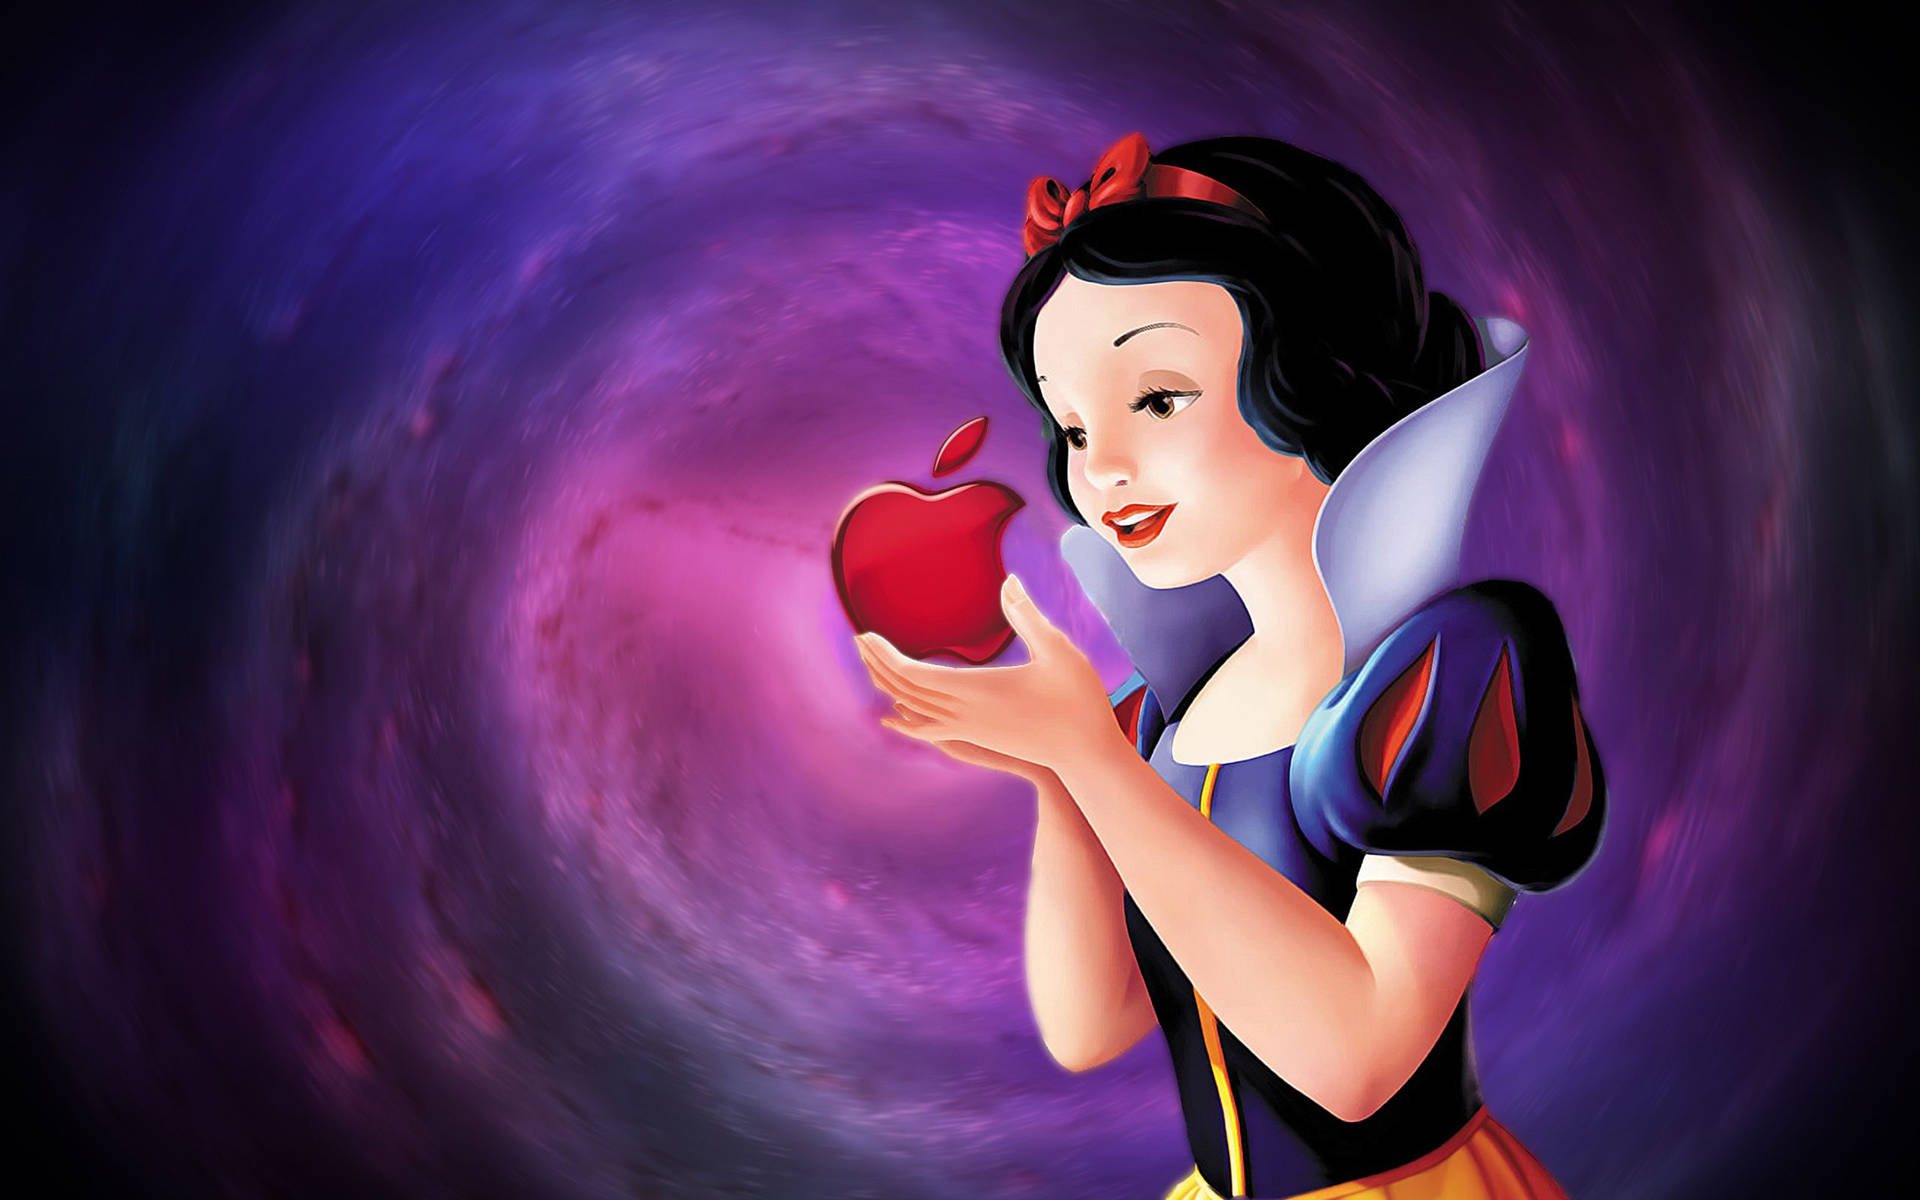 The iconic and classic Snow White Apple Logo Wallpaper